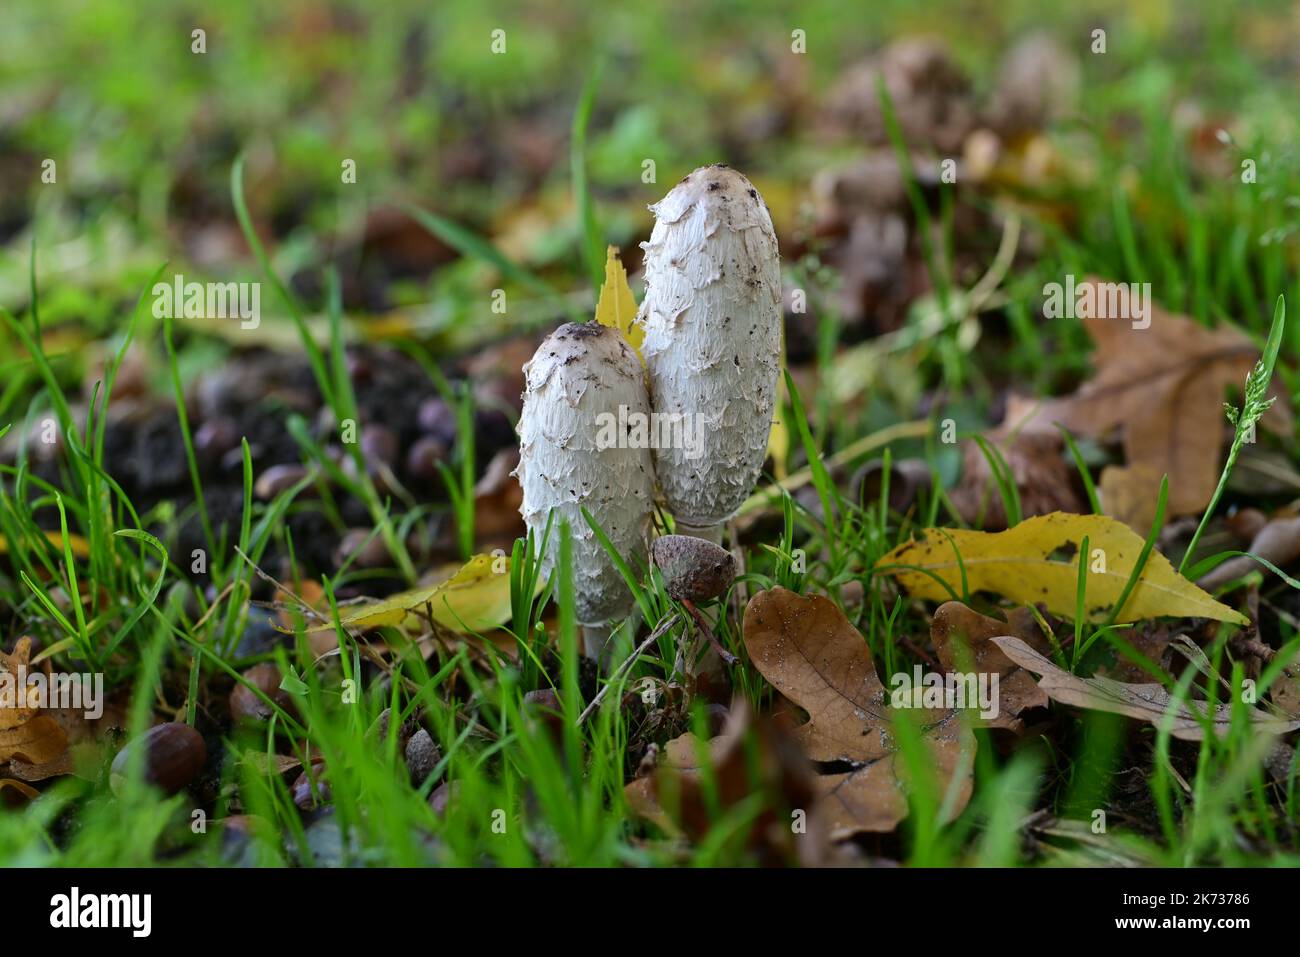 White mashrooms at the edge of the field Stock Photo